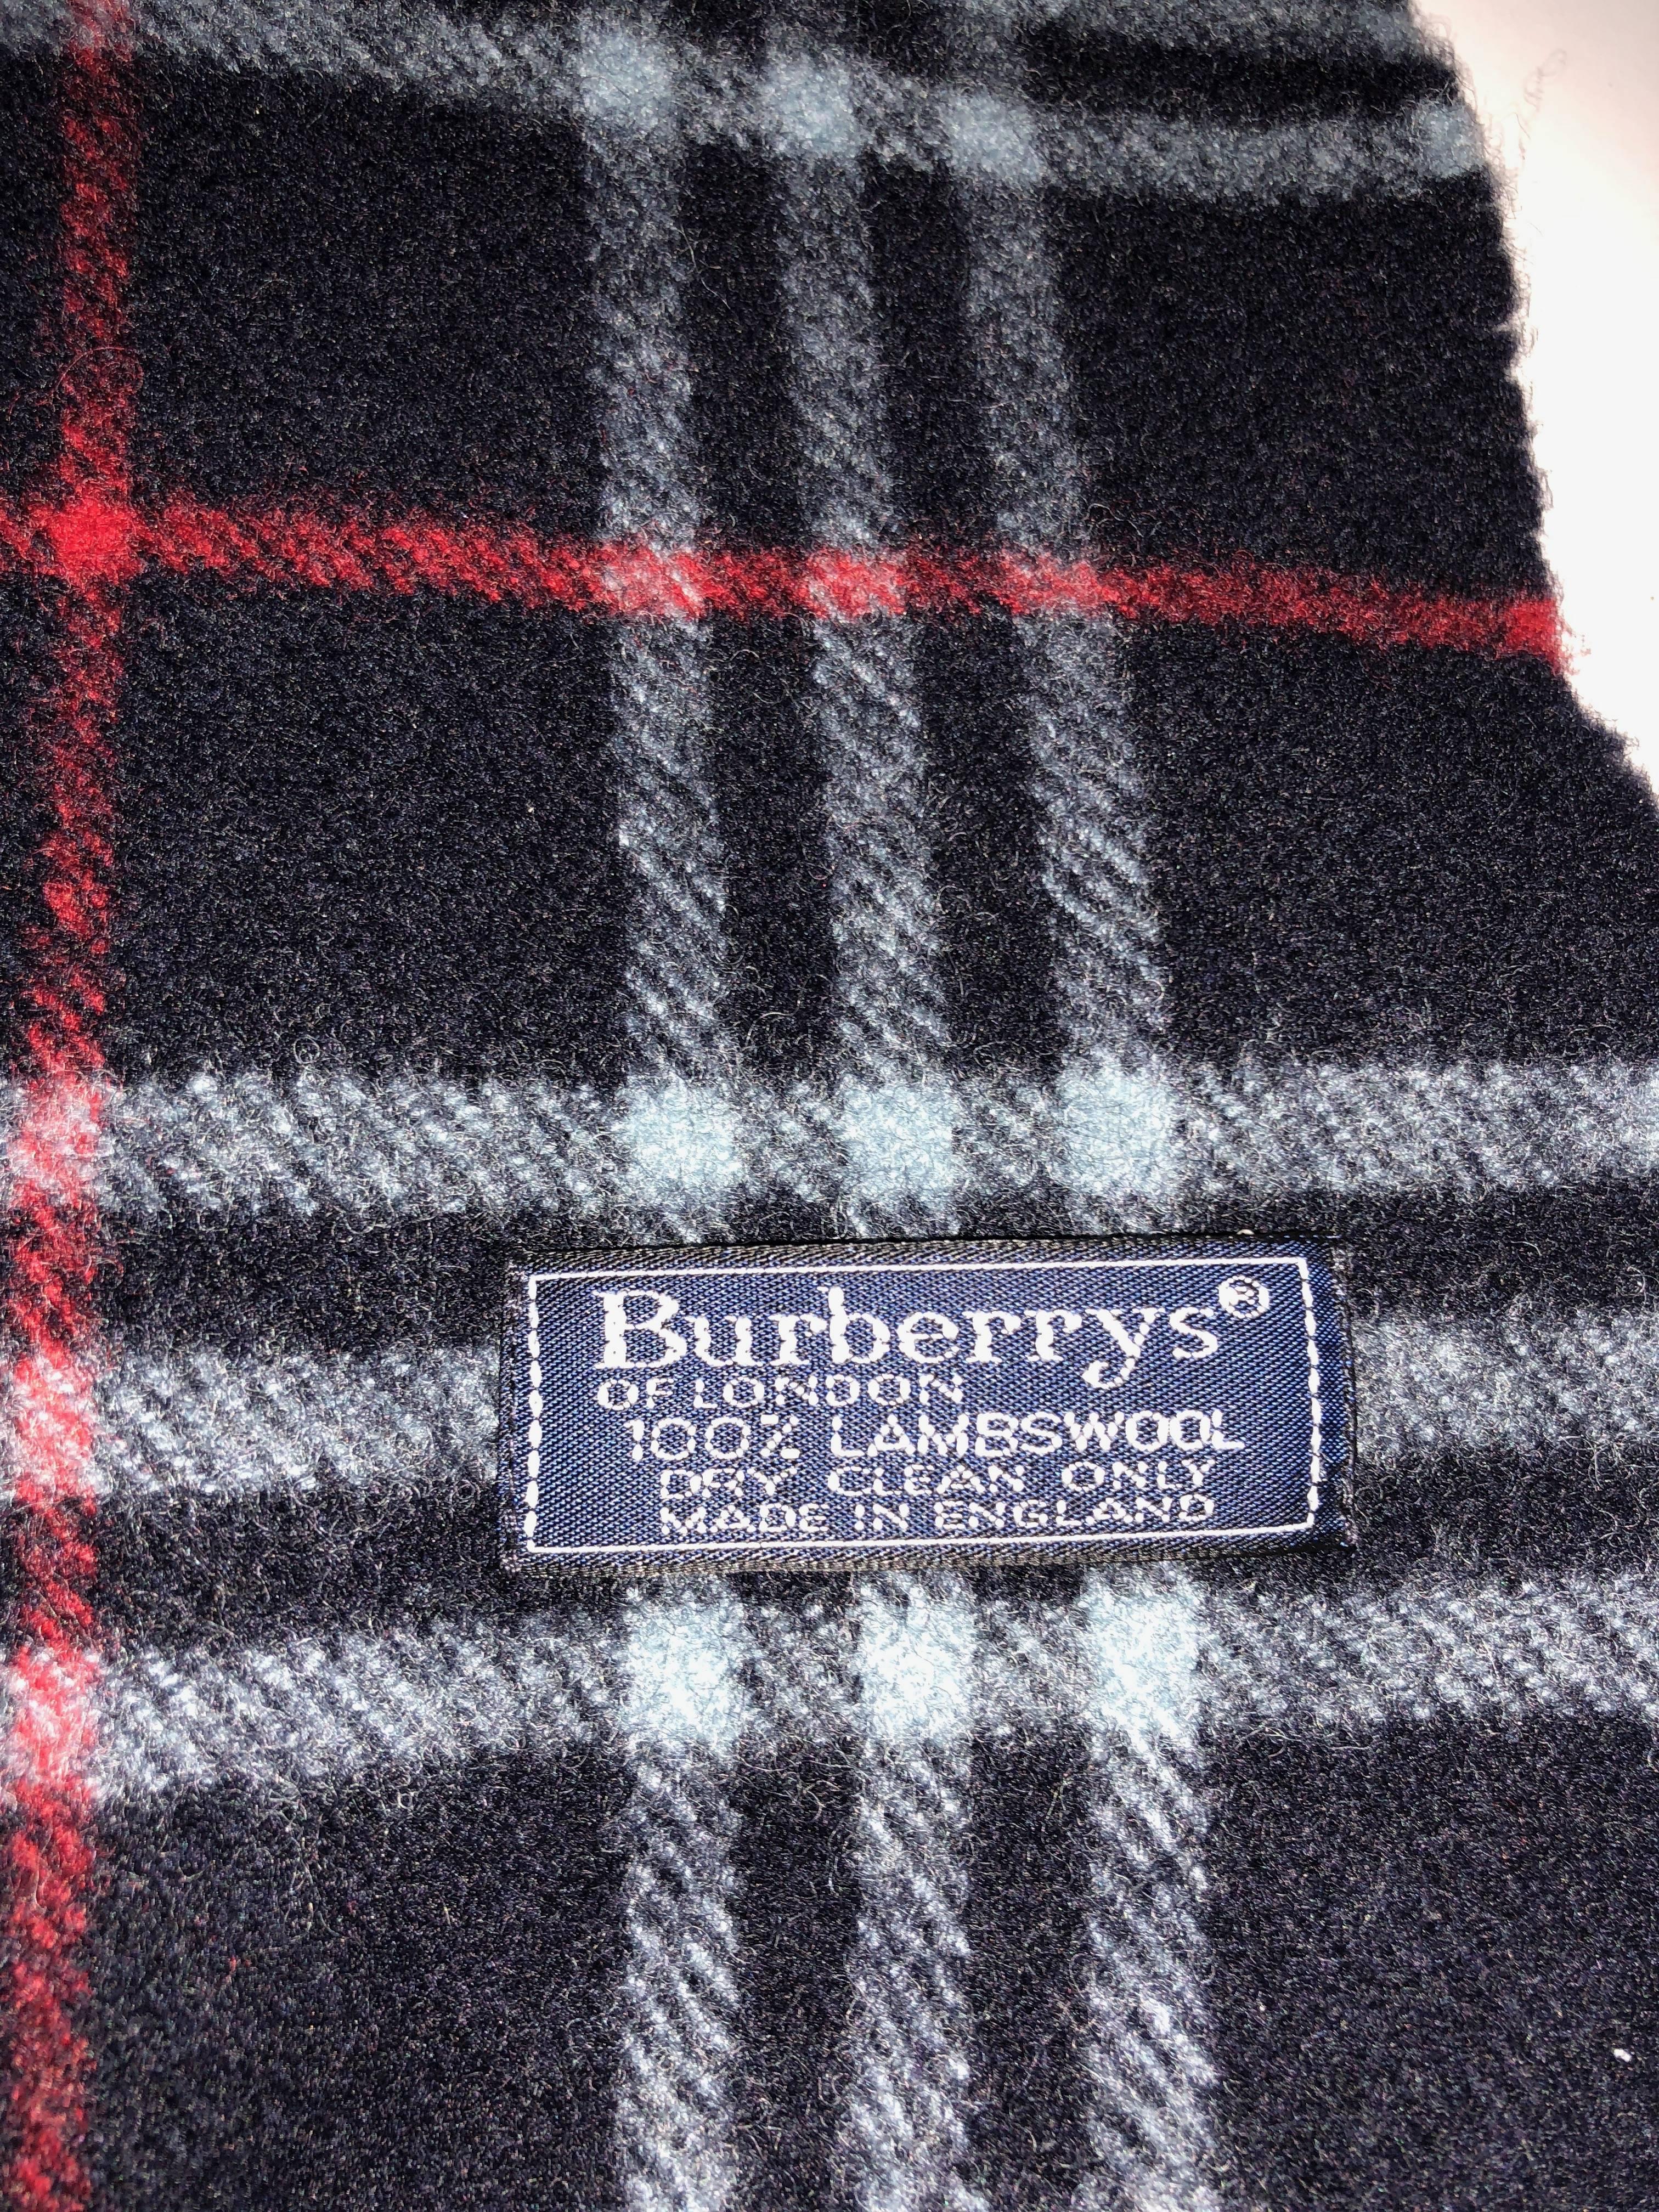 Burberrys London Lambswool Scarf Blue Red White Plaid Check with Fringe 1